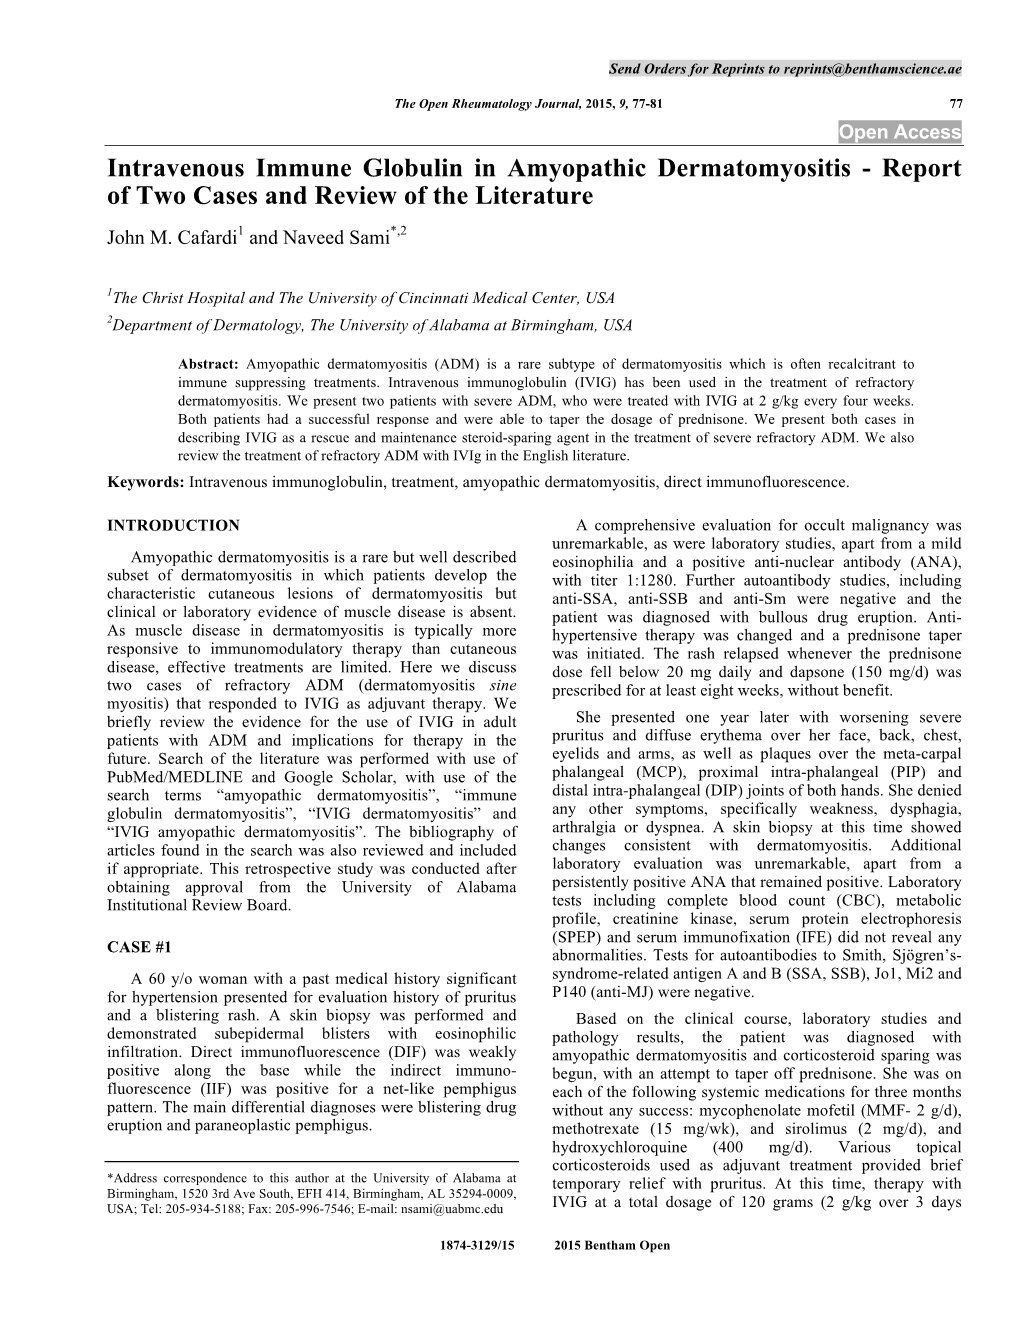 Intravenous Immune Globulin in Amyopathic Dermatomyositis - Report of Two Cases and Review of the Literature John M